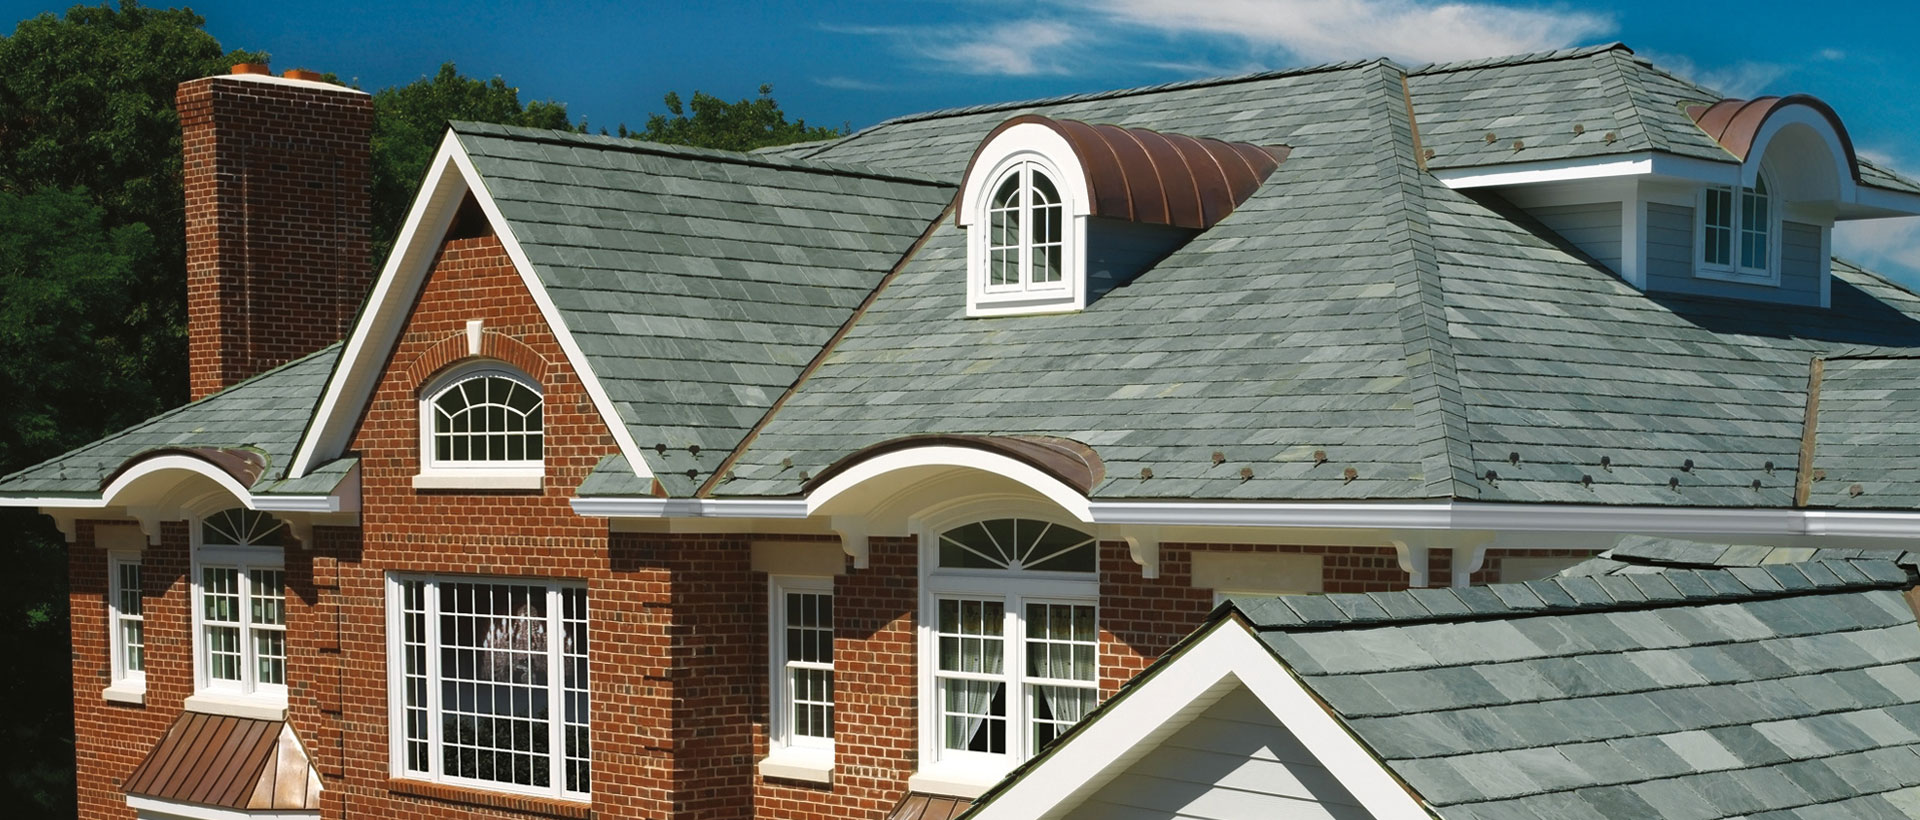 Experience Superior Roofing Solutions With Illinois’ Trusted Contractor